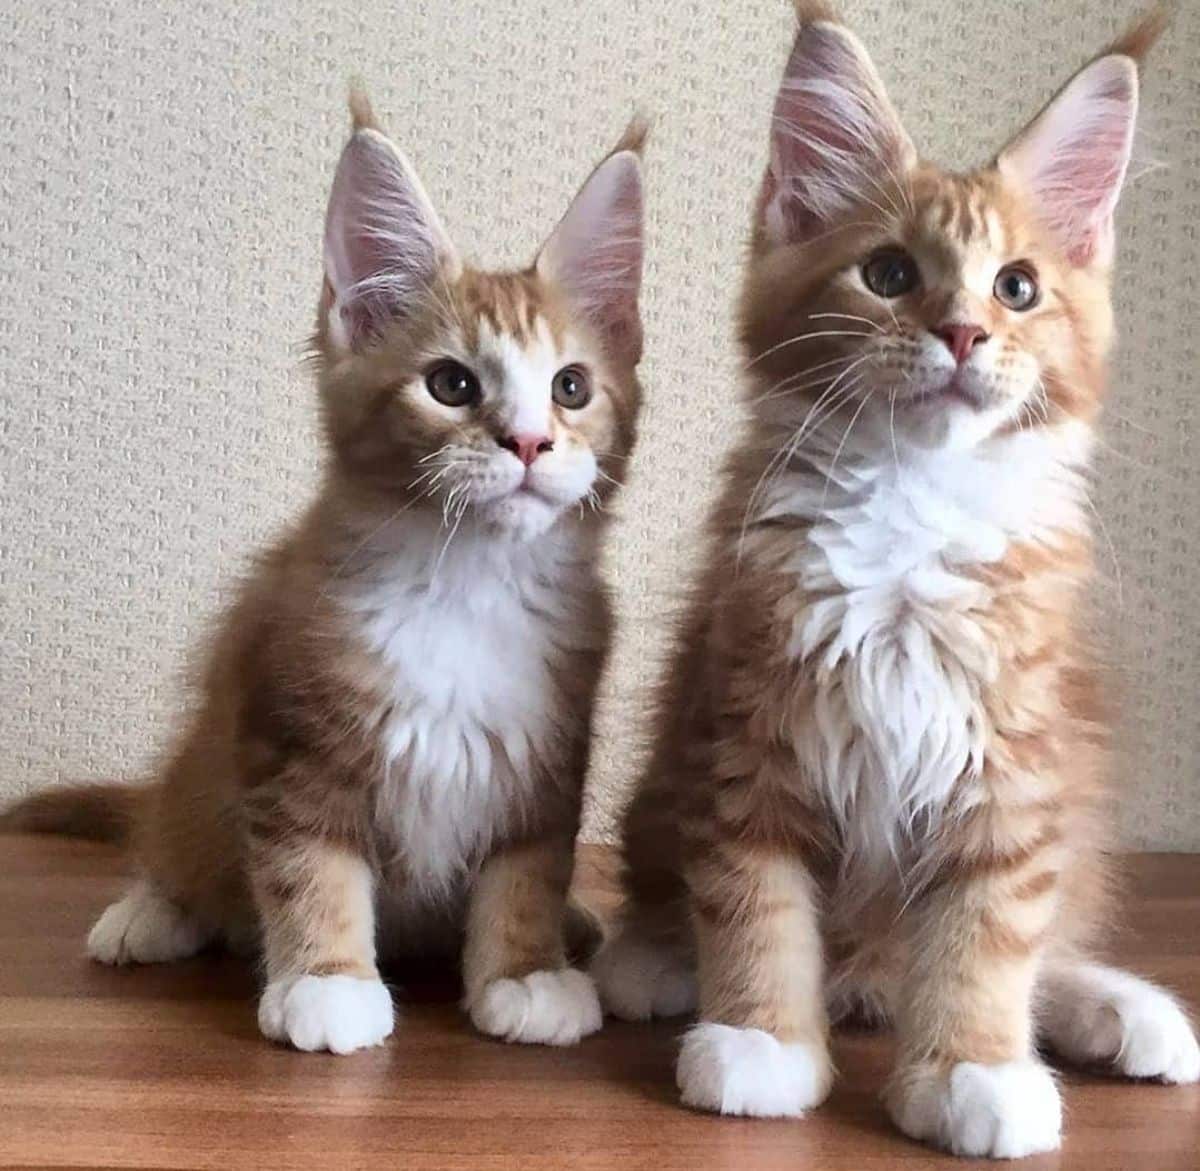 Two adorable ginger maine coon kittens with white paws sitting on a floor.